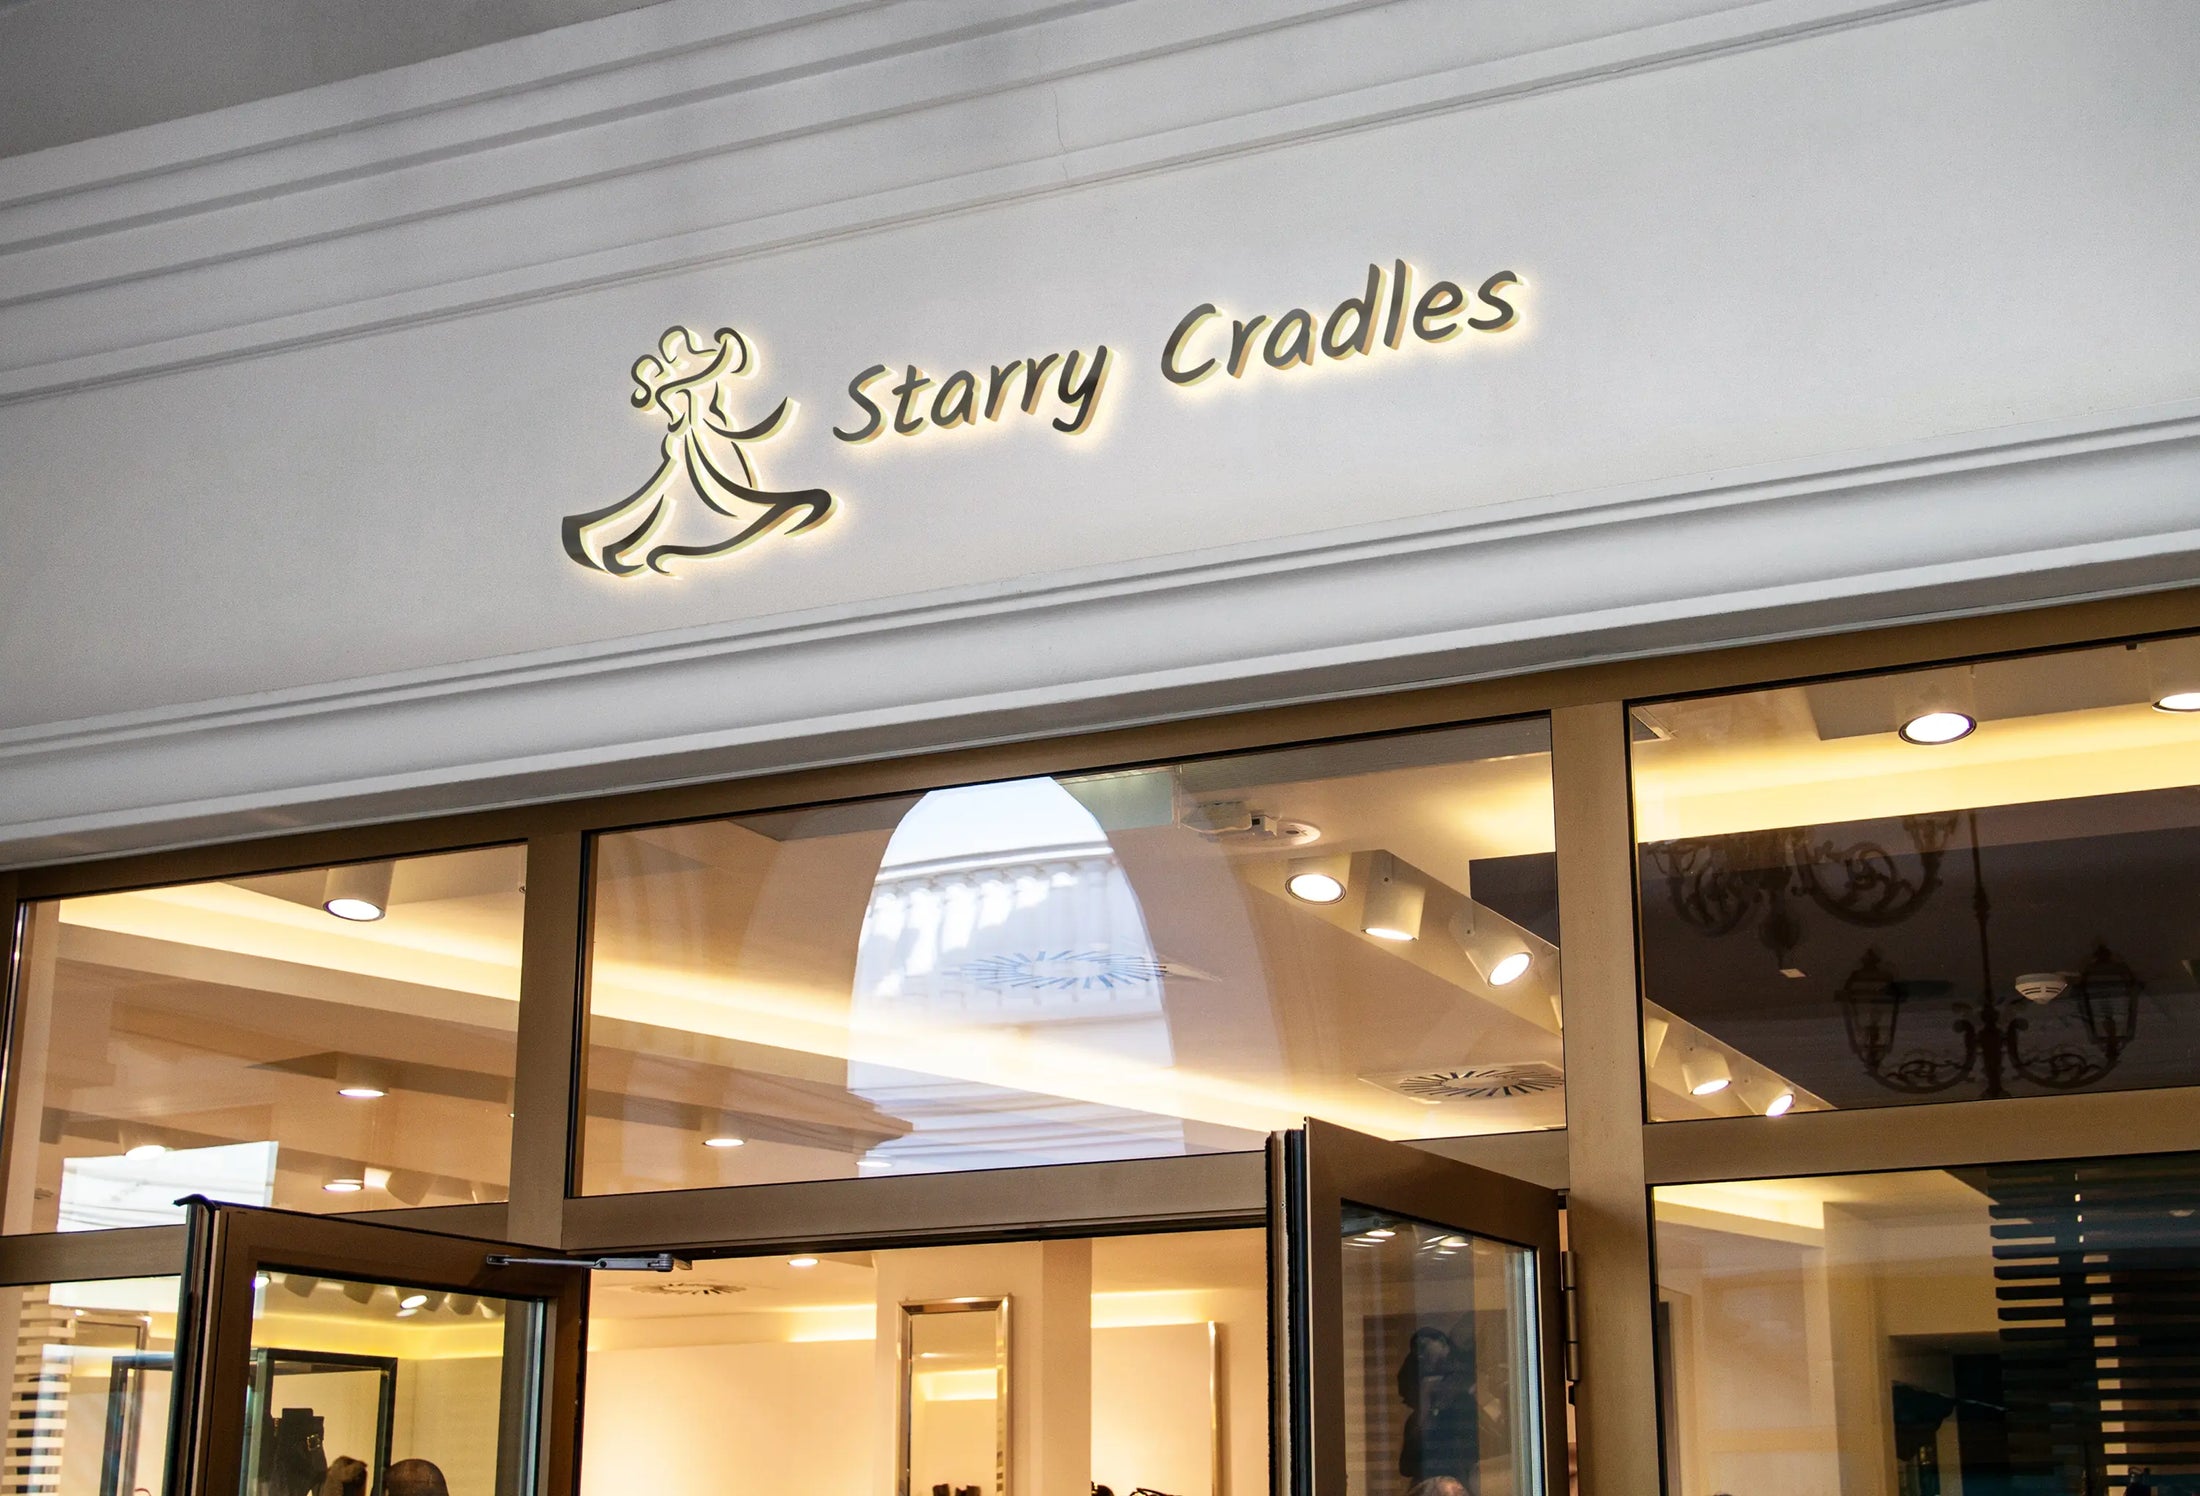 Facade of the Starry Cradles jewelry store